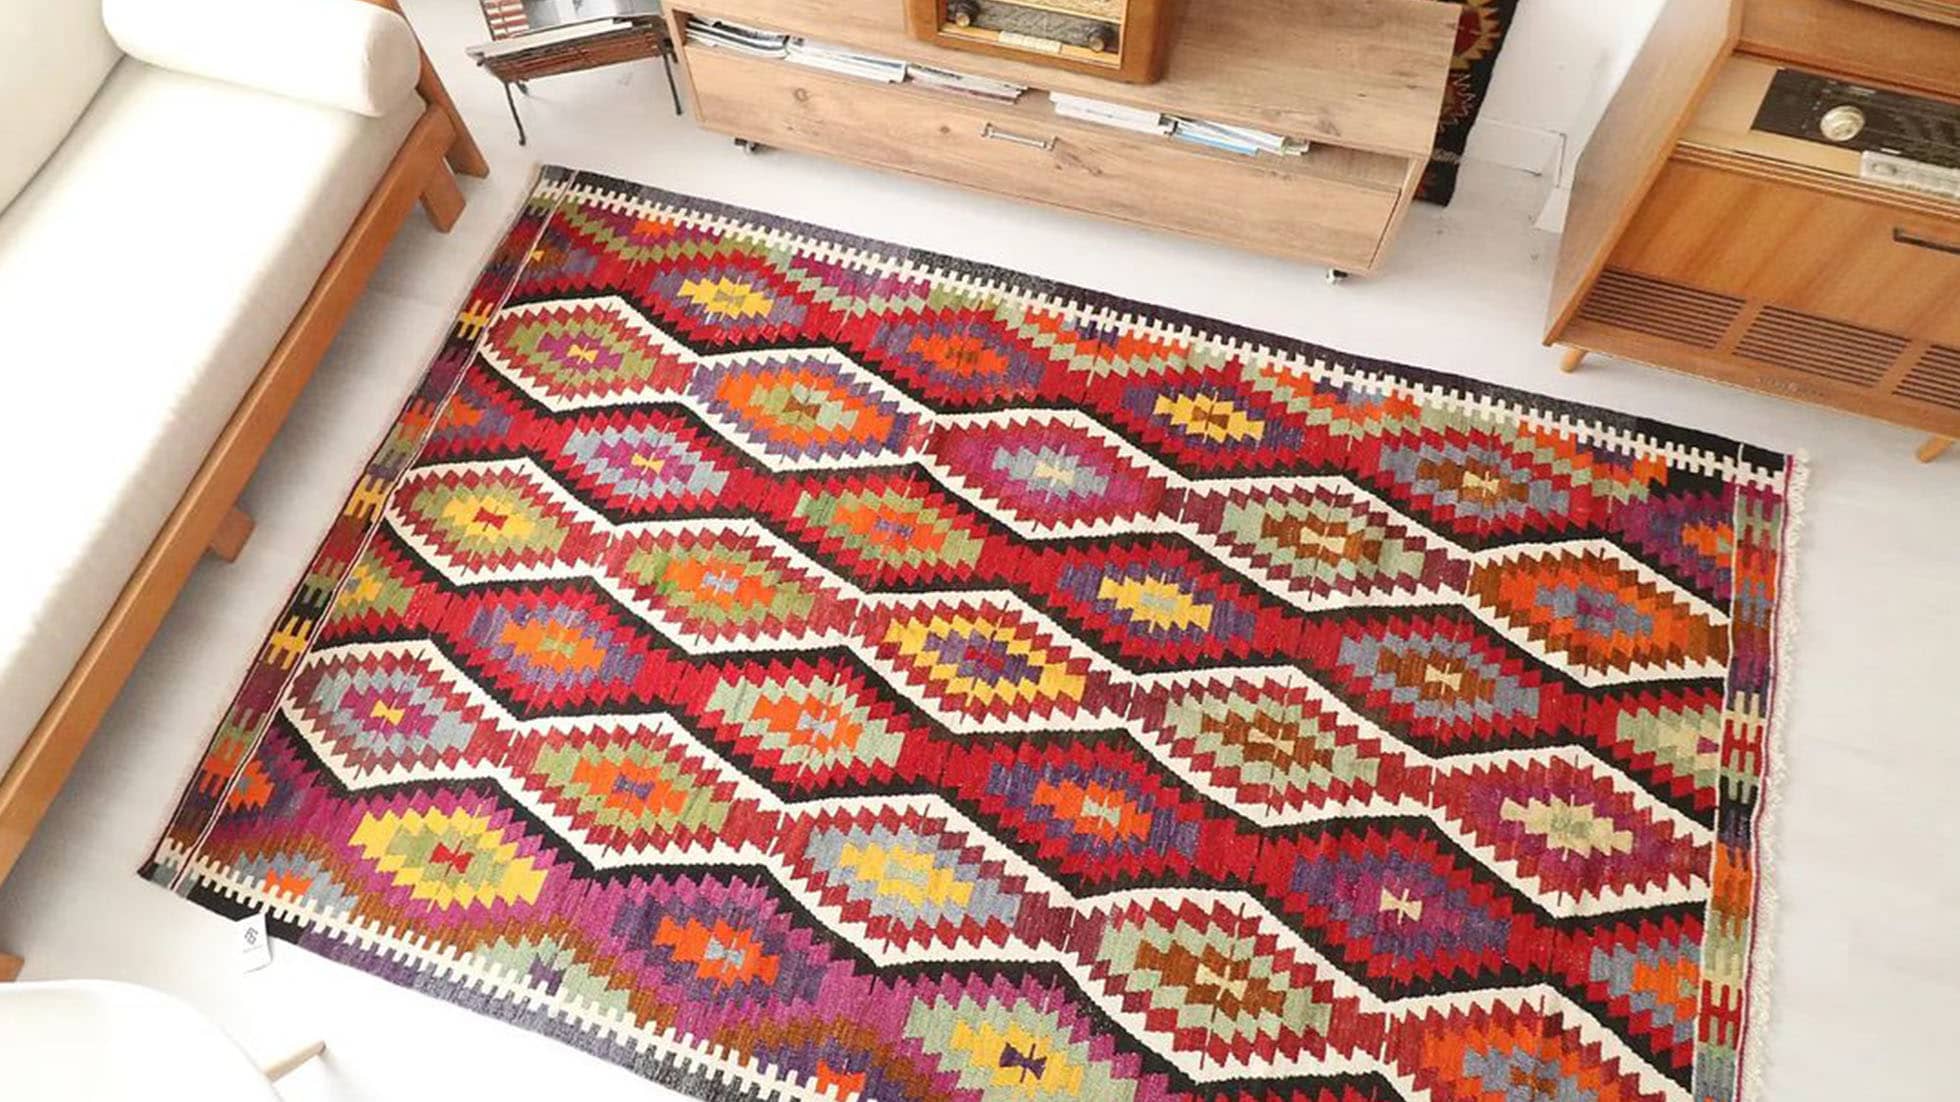 a calm and peaceful interior design setting accomplished by a one-of-a-kind KCNY kilim rug